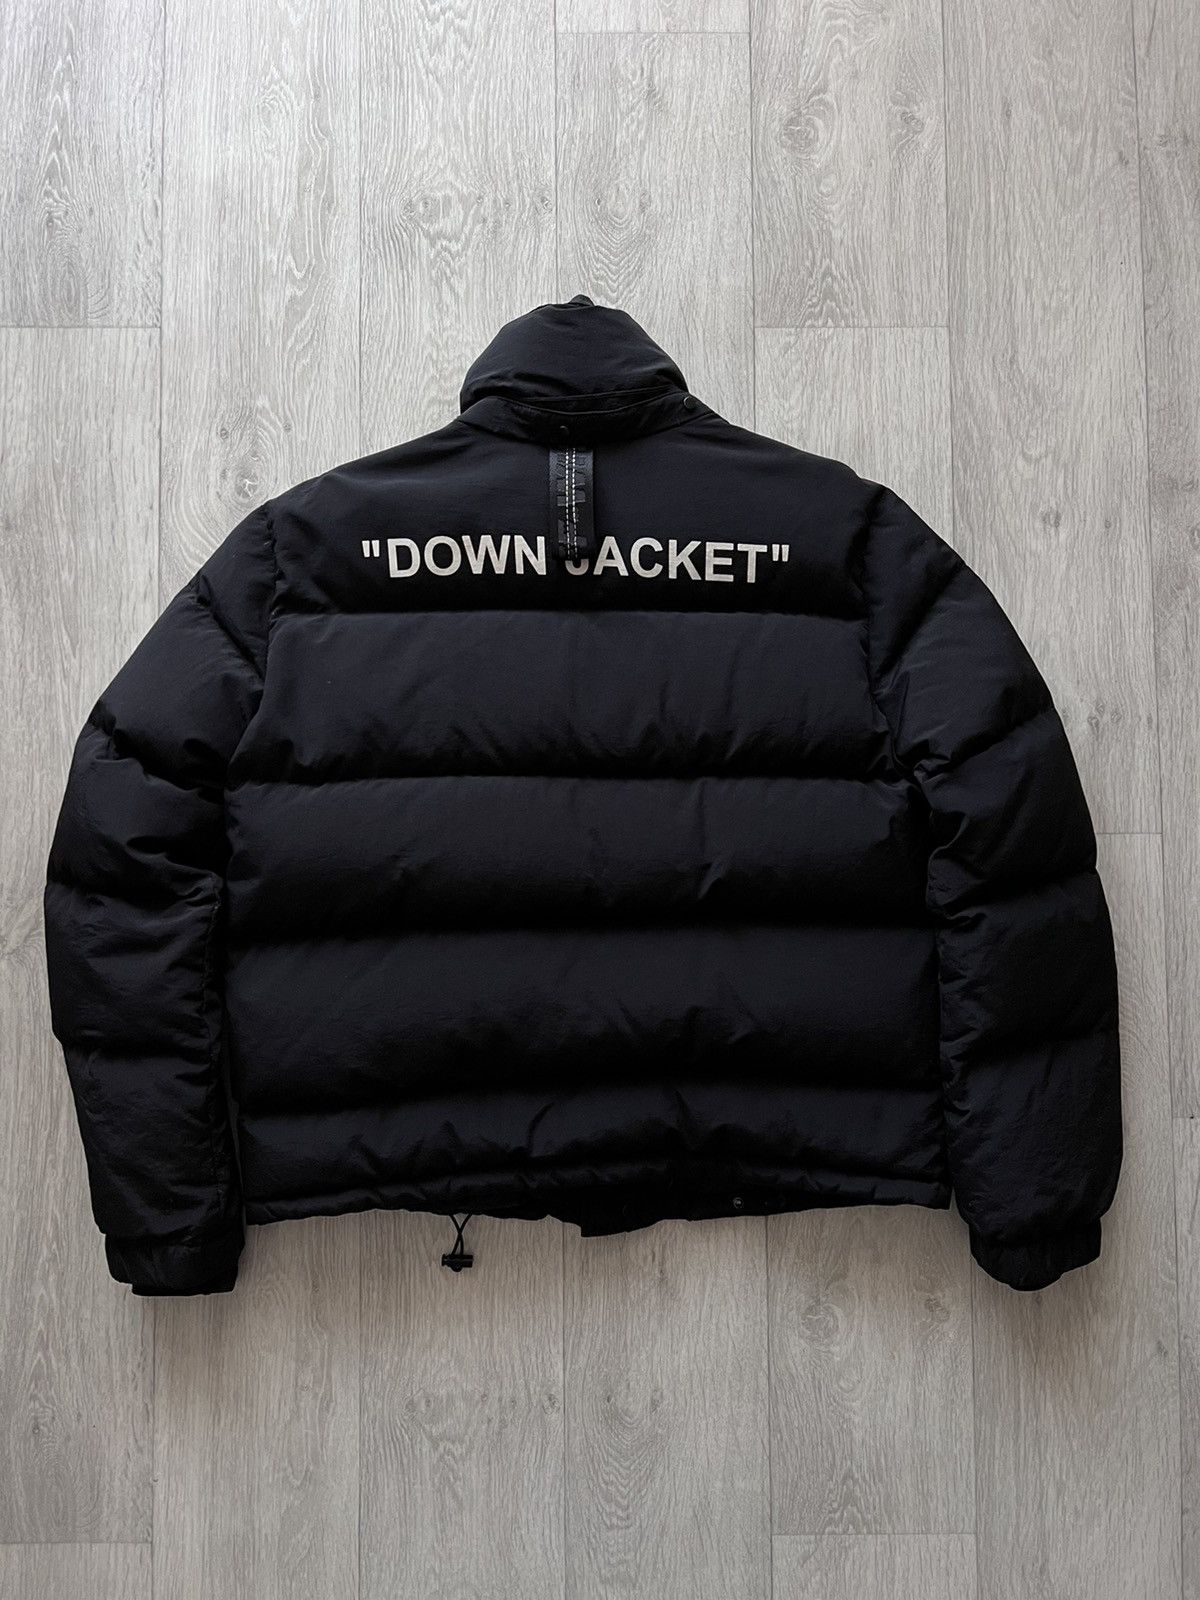 Off-White Off white down jacket puffer (In the dry cleaners) | Grailed